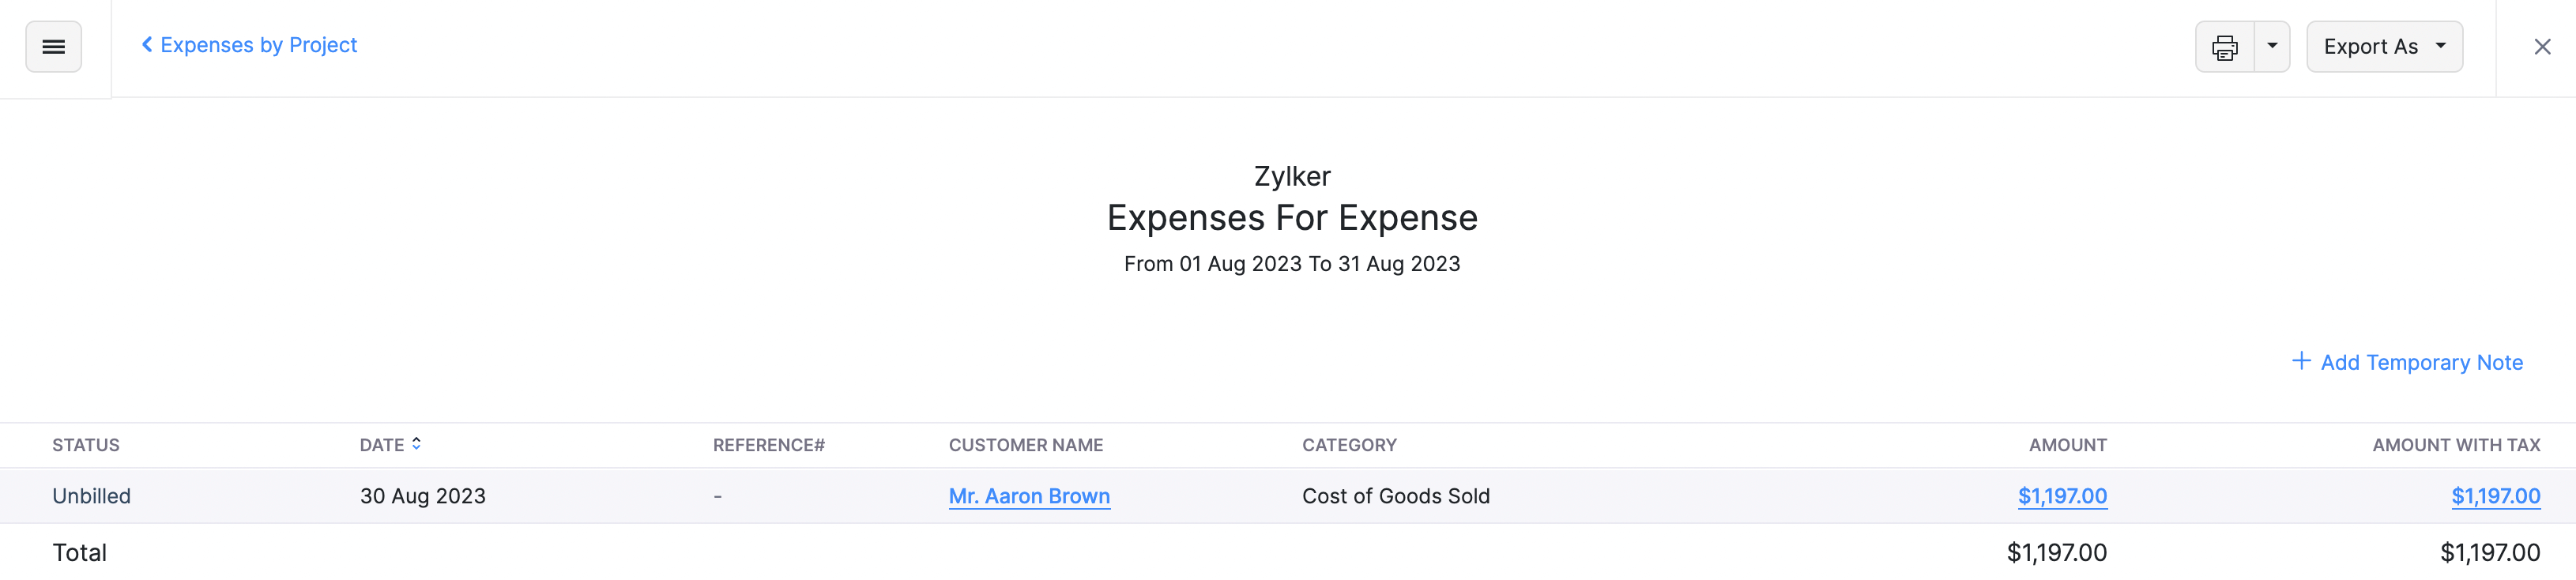 Expense by Projects Report - 2